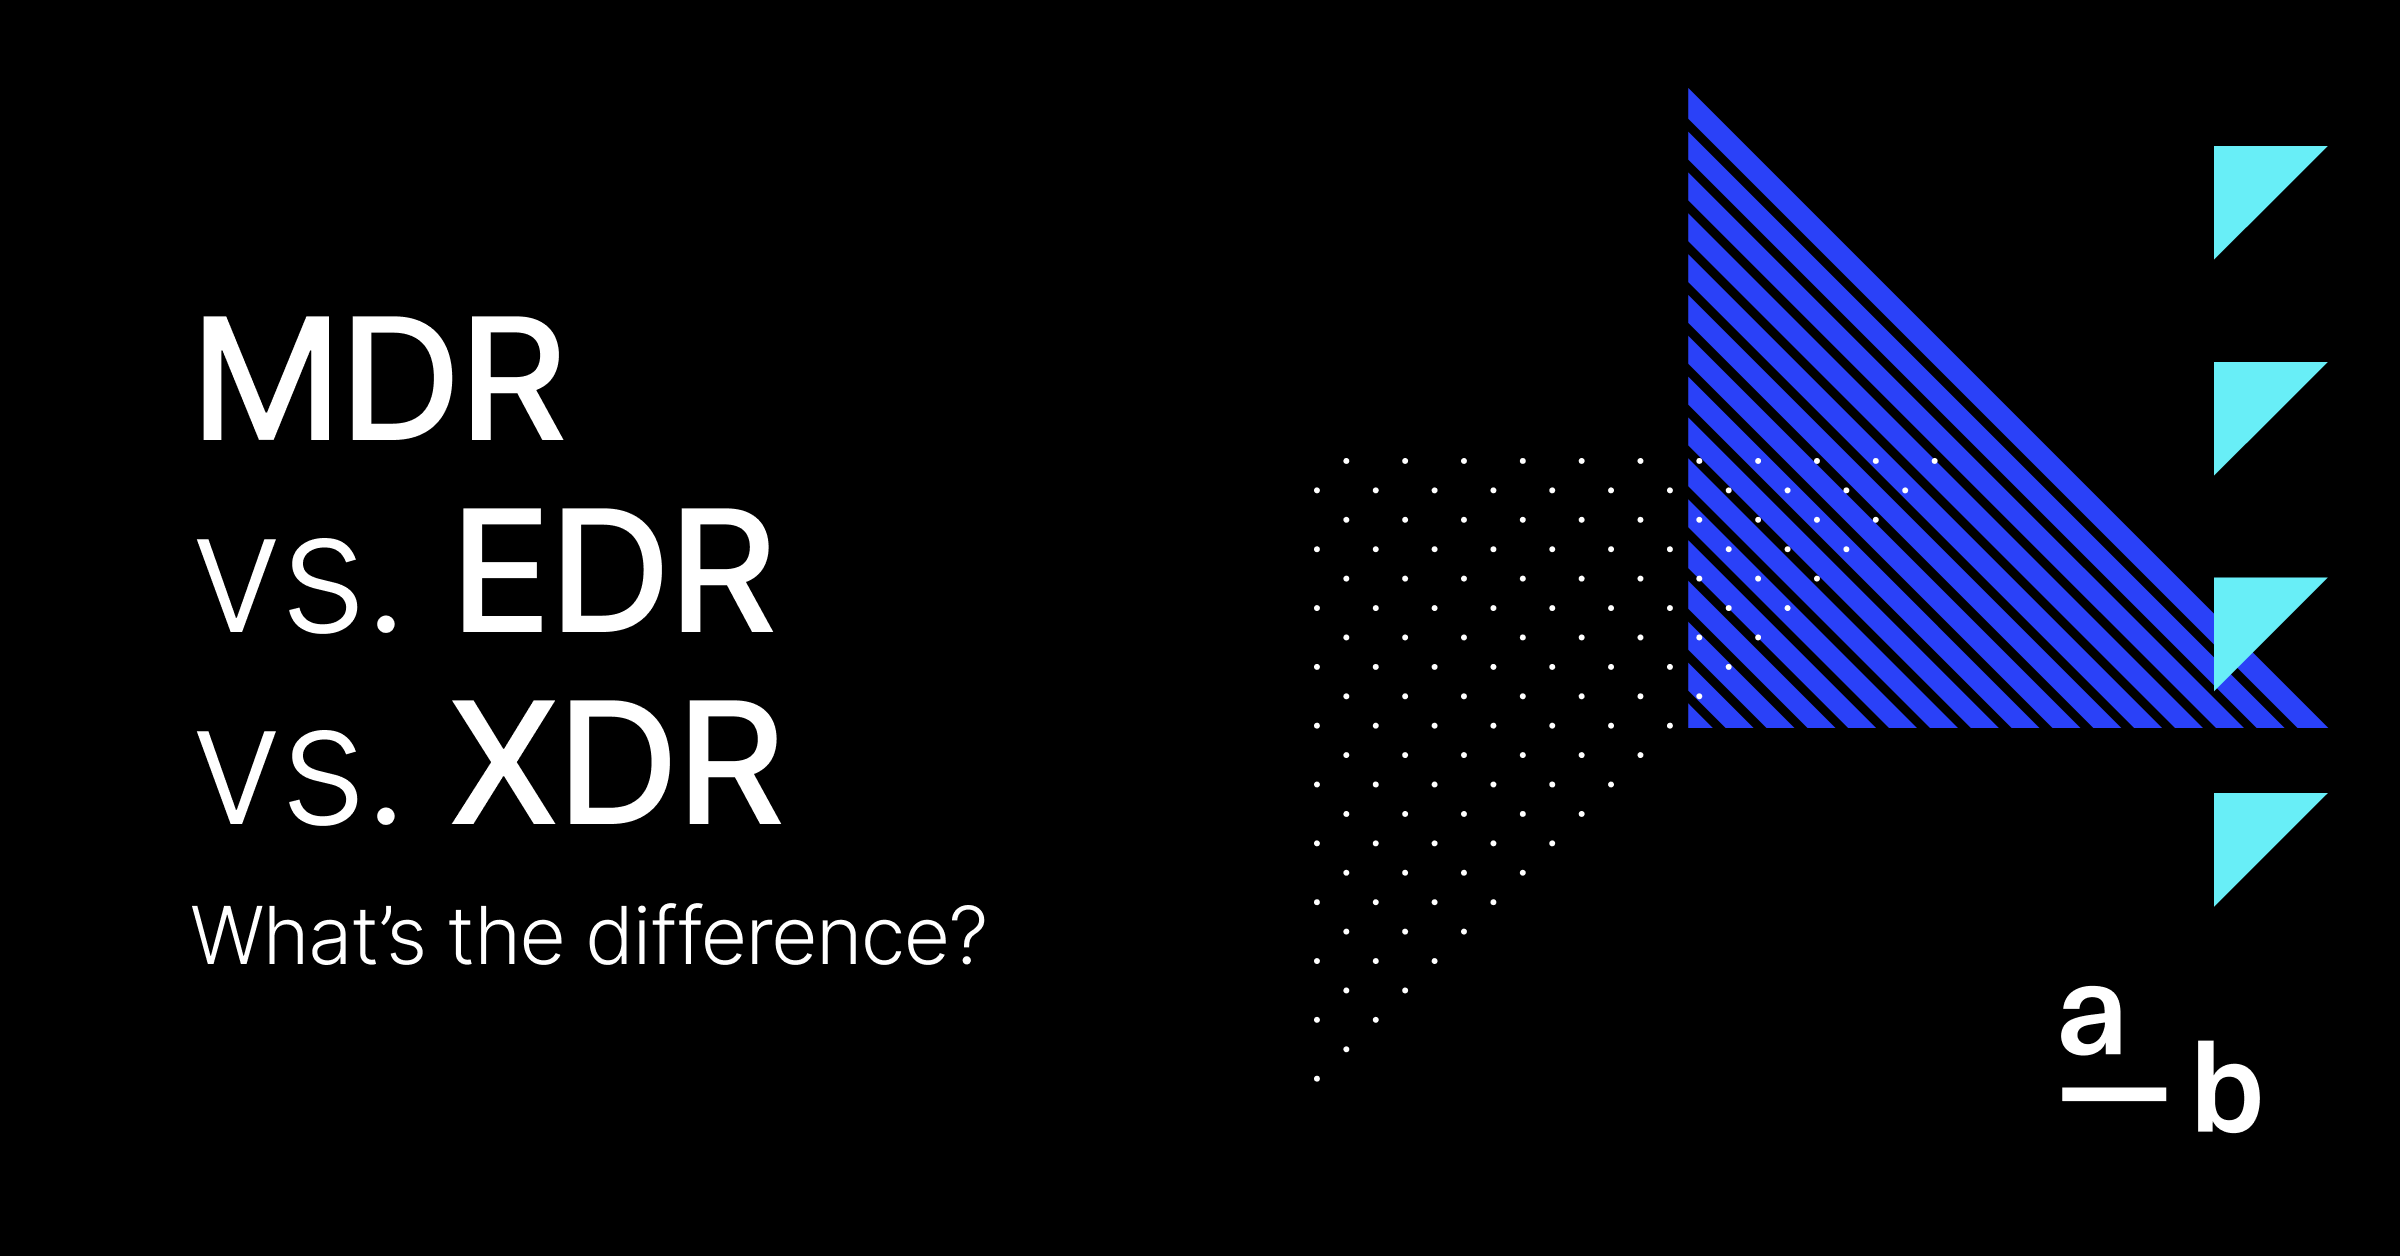 MDR vs. EDR vs. XDR: What’s the Difference?